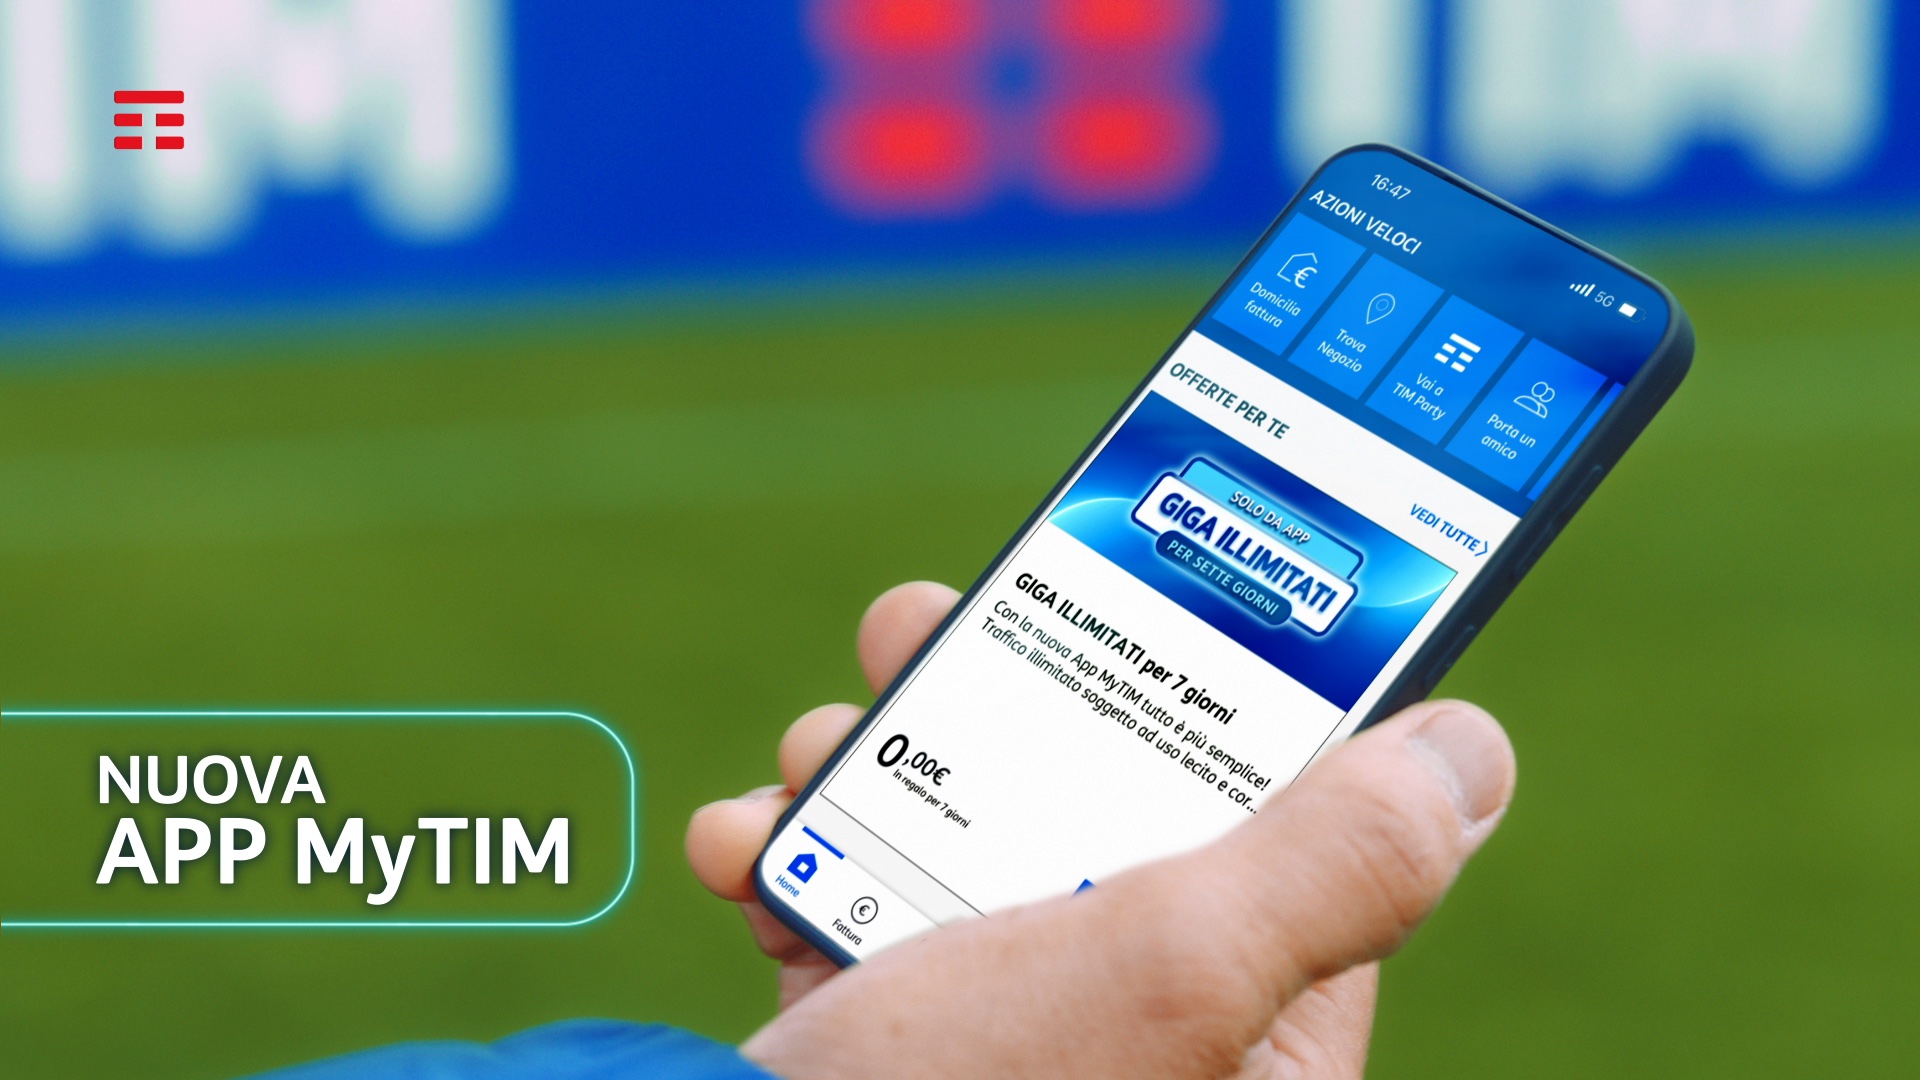 New MyTIM App, the launch spot with the national football team